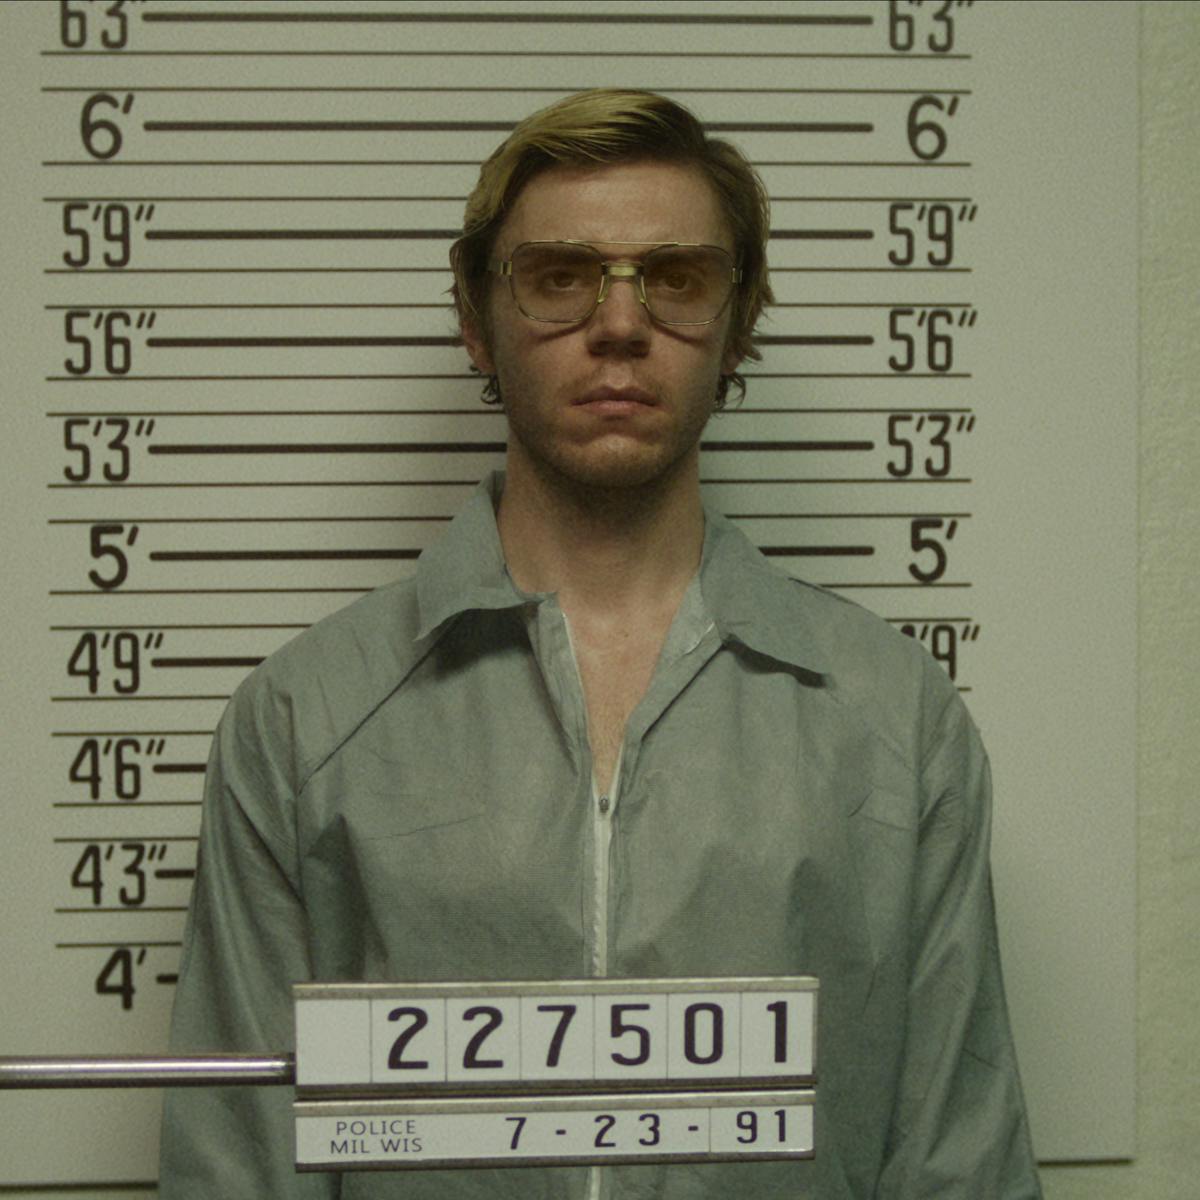 They're making money off tragedy' – Netflix's Dahmer series shows the dangers of fictionalising real horrors